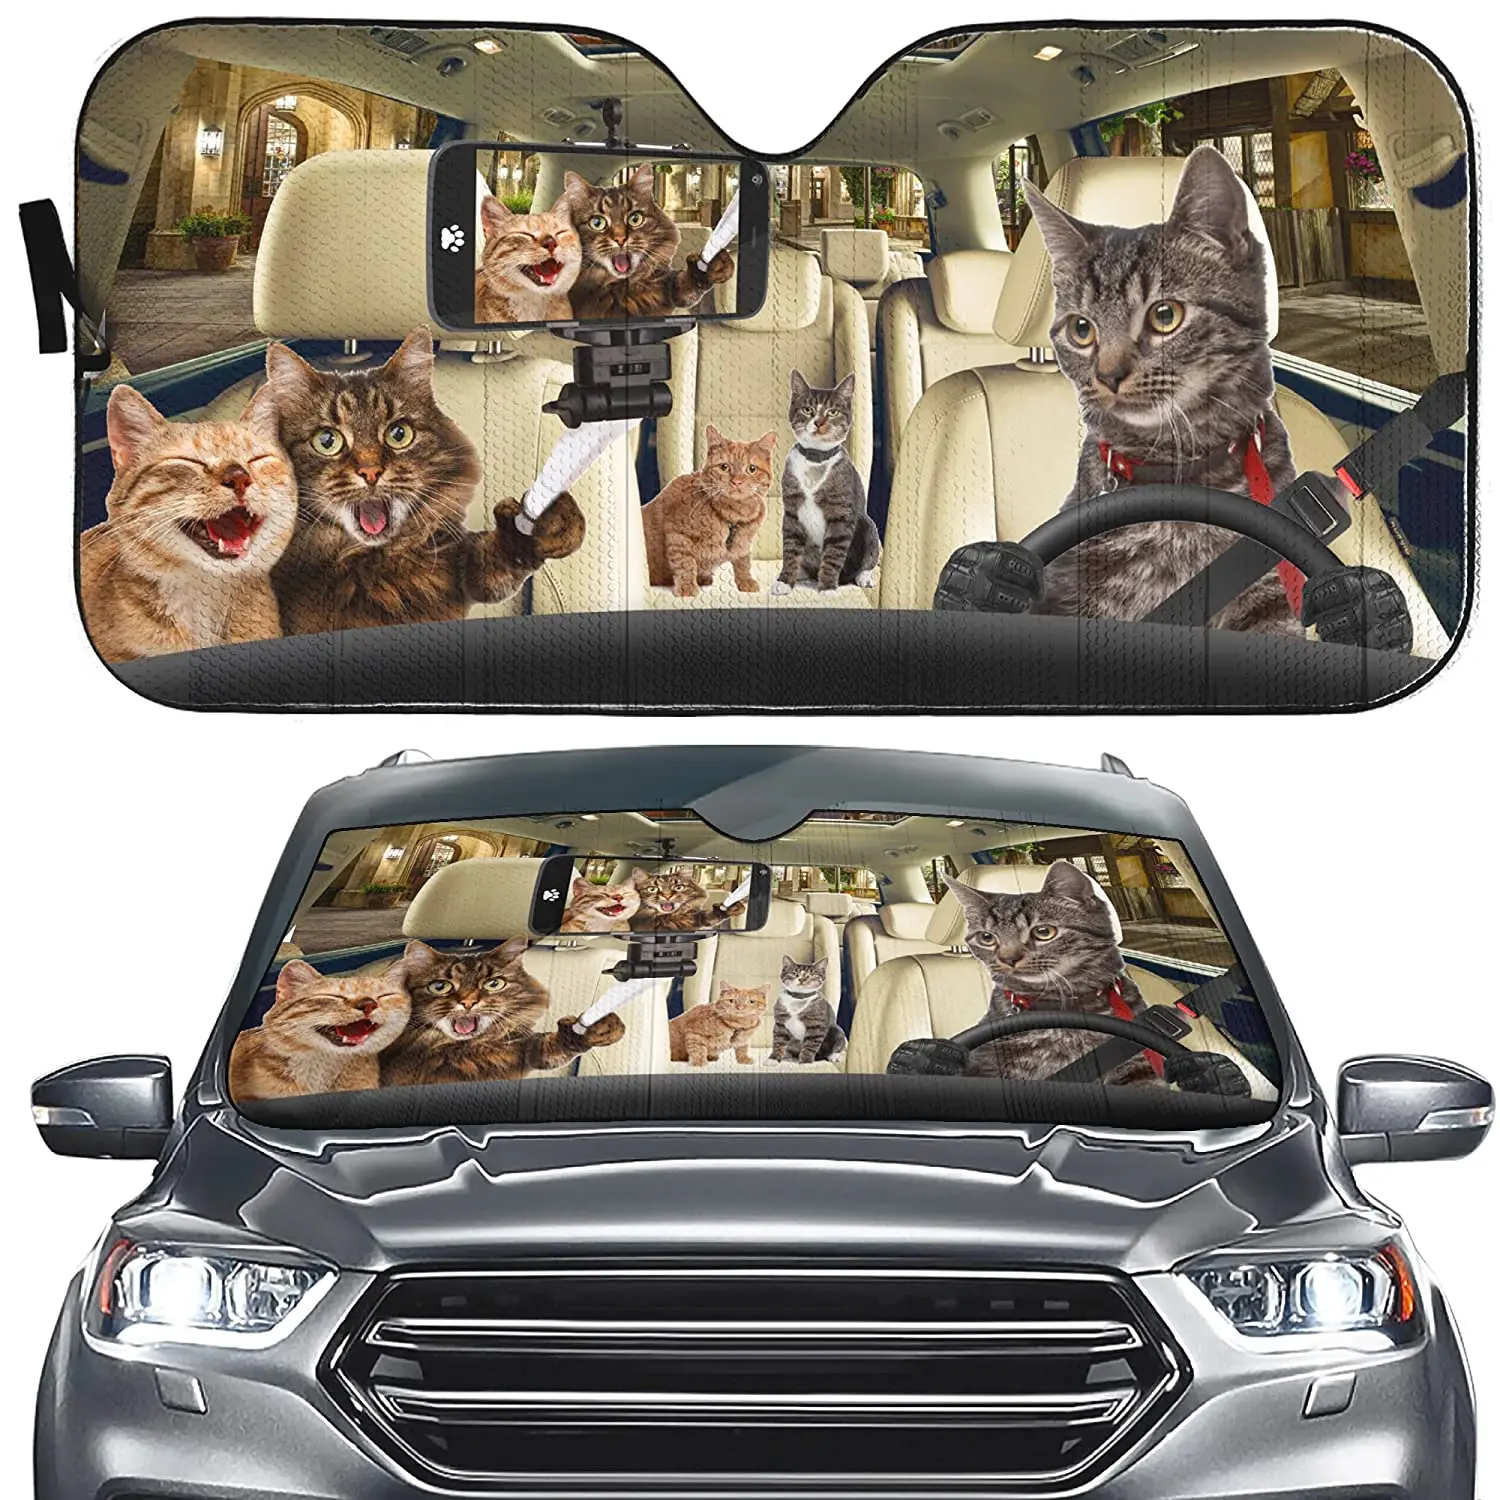 Selfie Cat Couple Sunshade Tabby Cat Driver Windshield Sun Shade for Car, Funny Amazing Pet Cat Auto Front Window Shade Visor Co